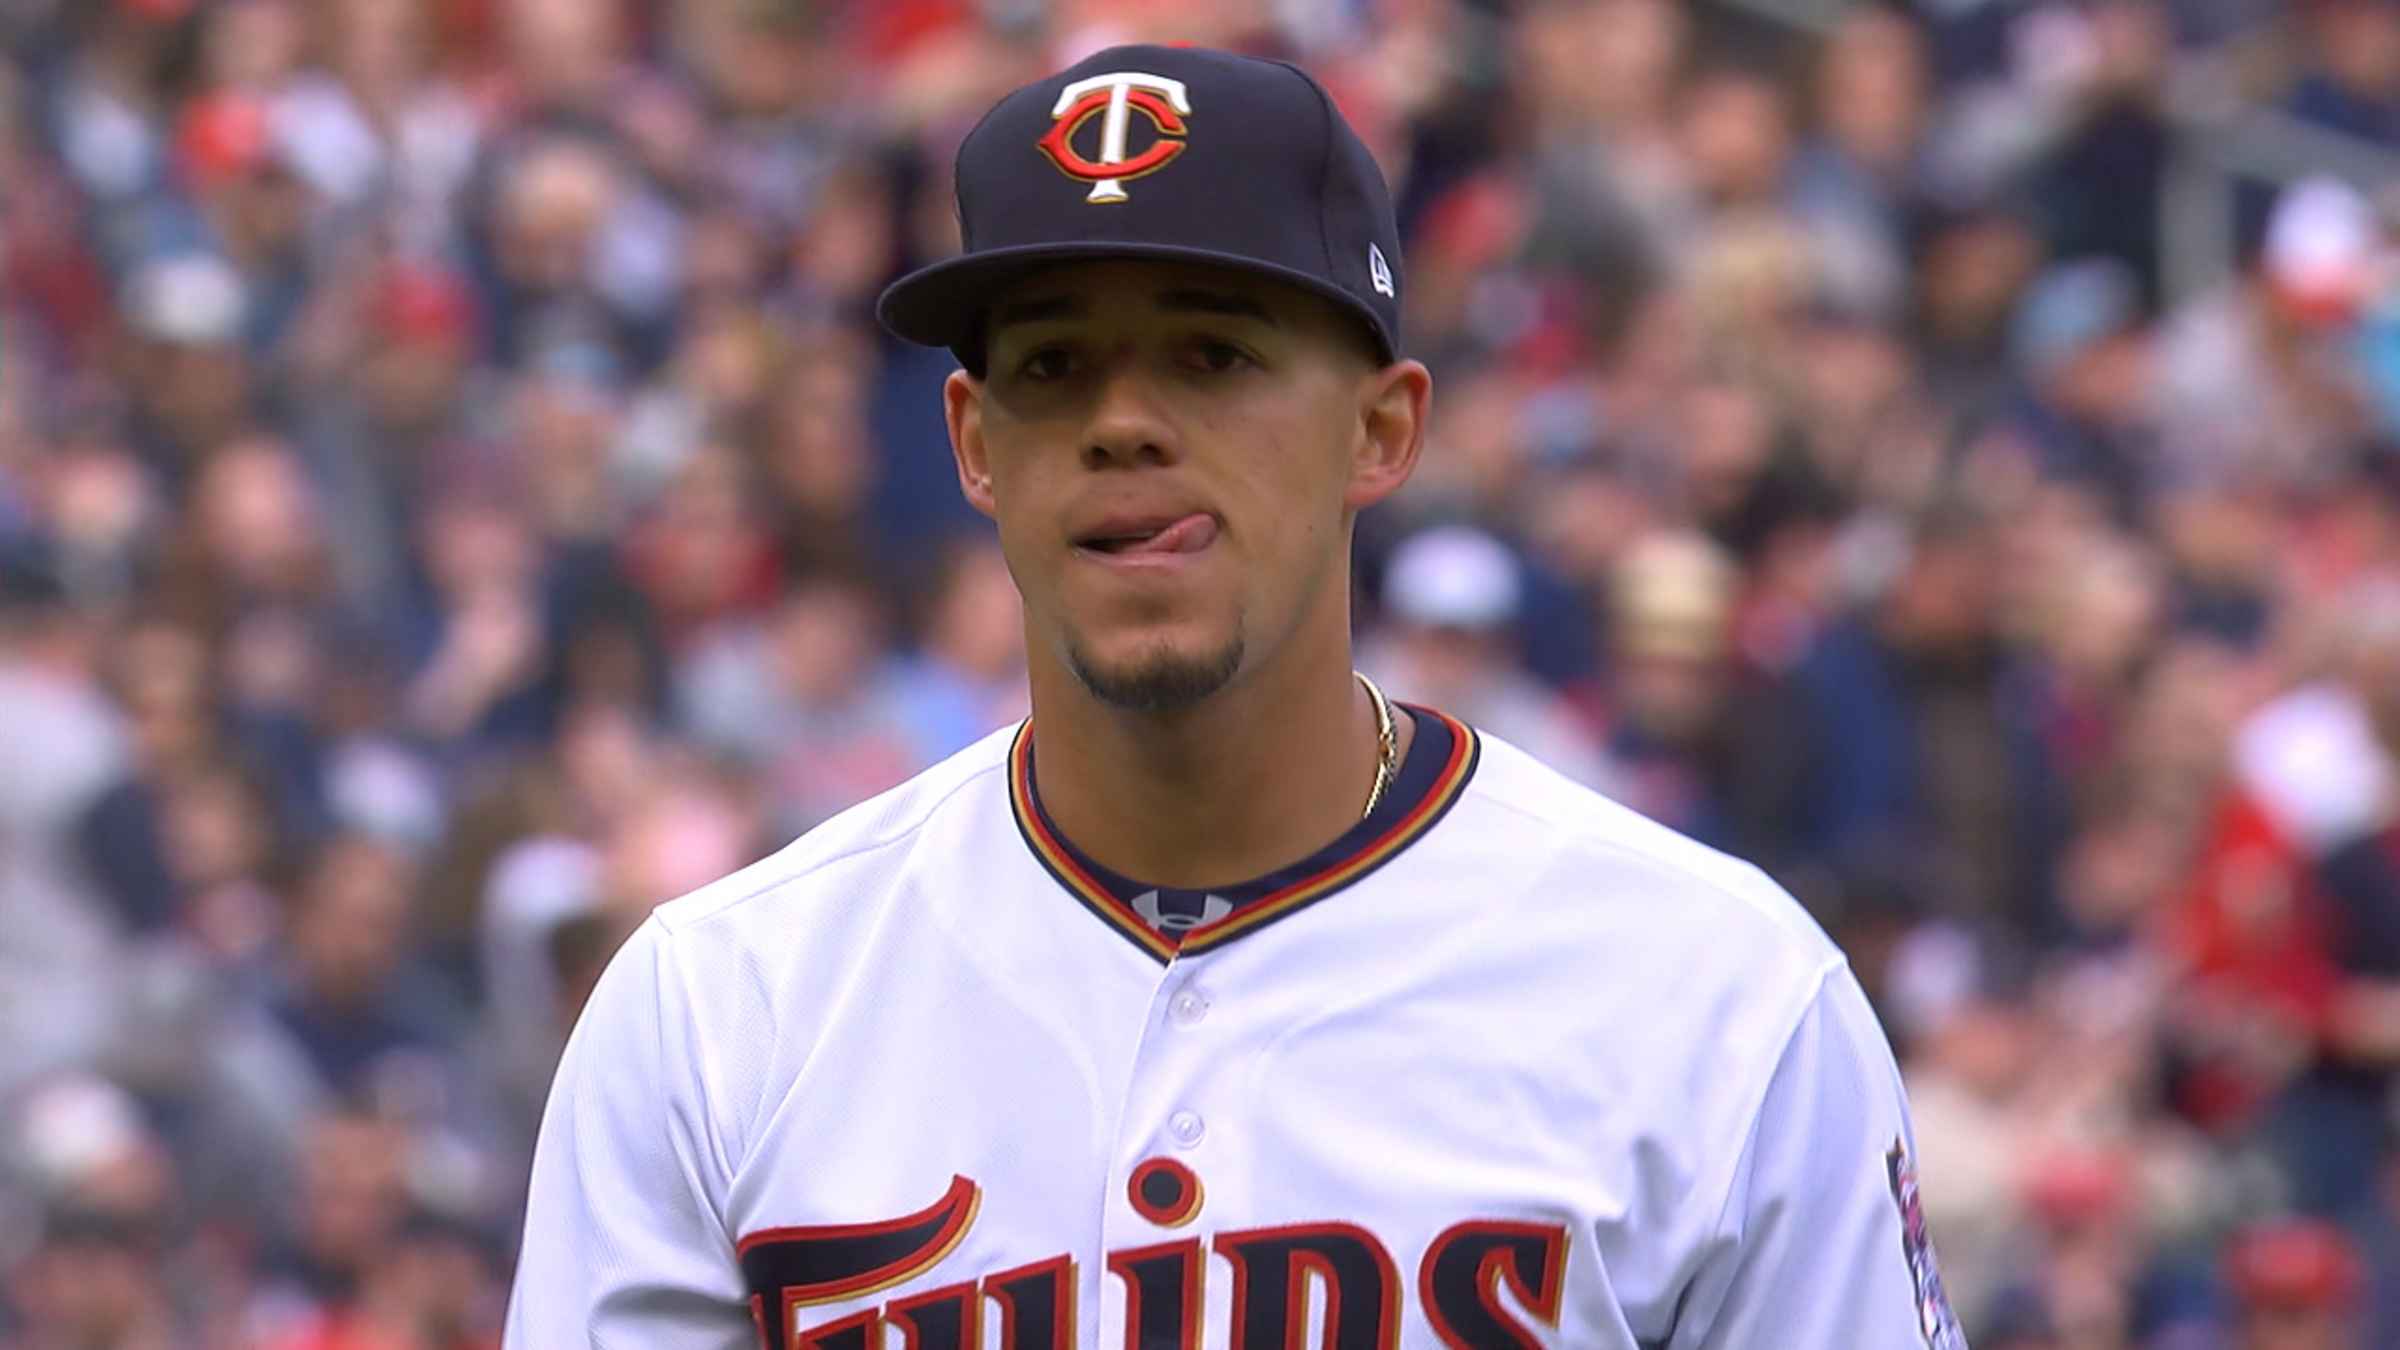 Indians to face Twins' Jose Berrios on Opening Day - Covering the